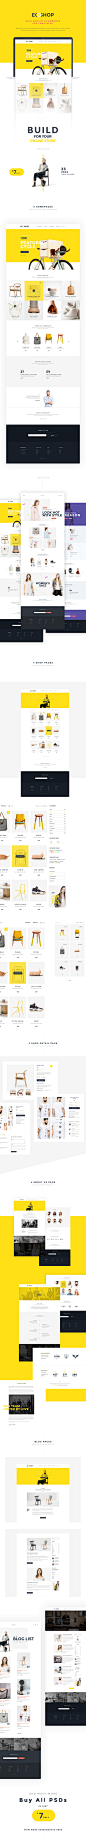 ECOSHOP - Multipurpose eCommerce PSD Template : ECOSHOP is high quality eCommerce PSD Templates which designed for commercial use like clothes, cosmetics, furniture, gadgets, shoes, bags, home decore etc. A ready psd template to make a various online shop